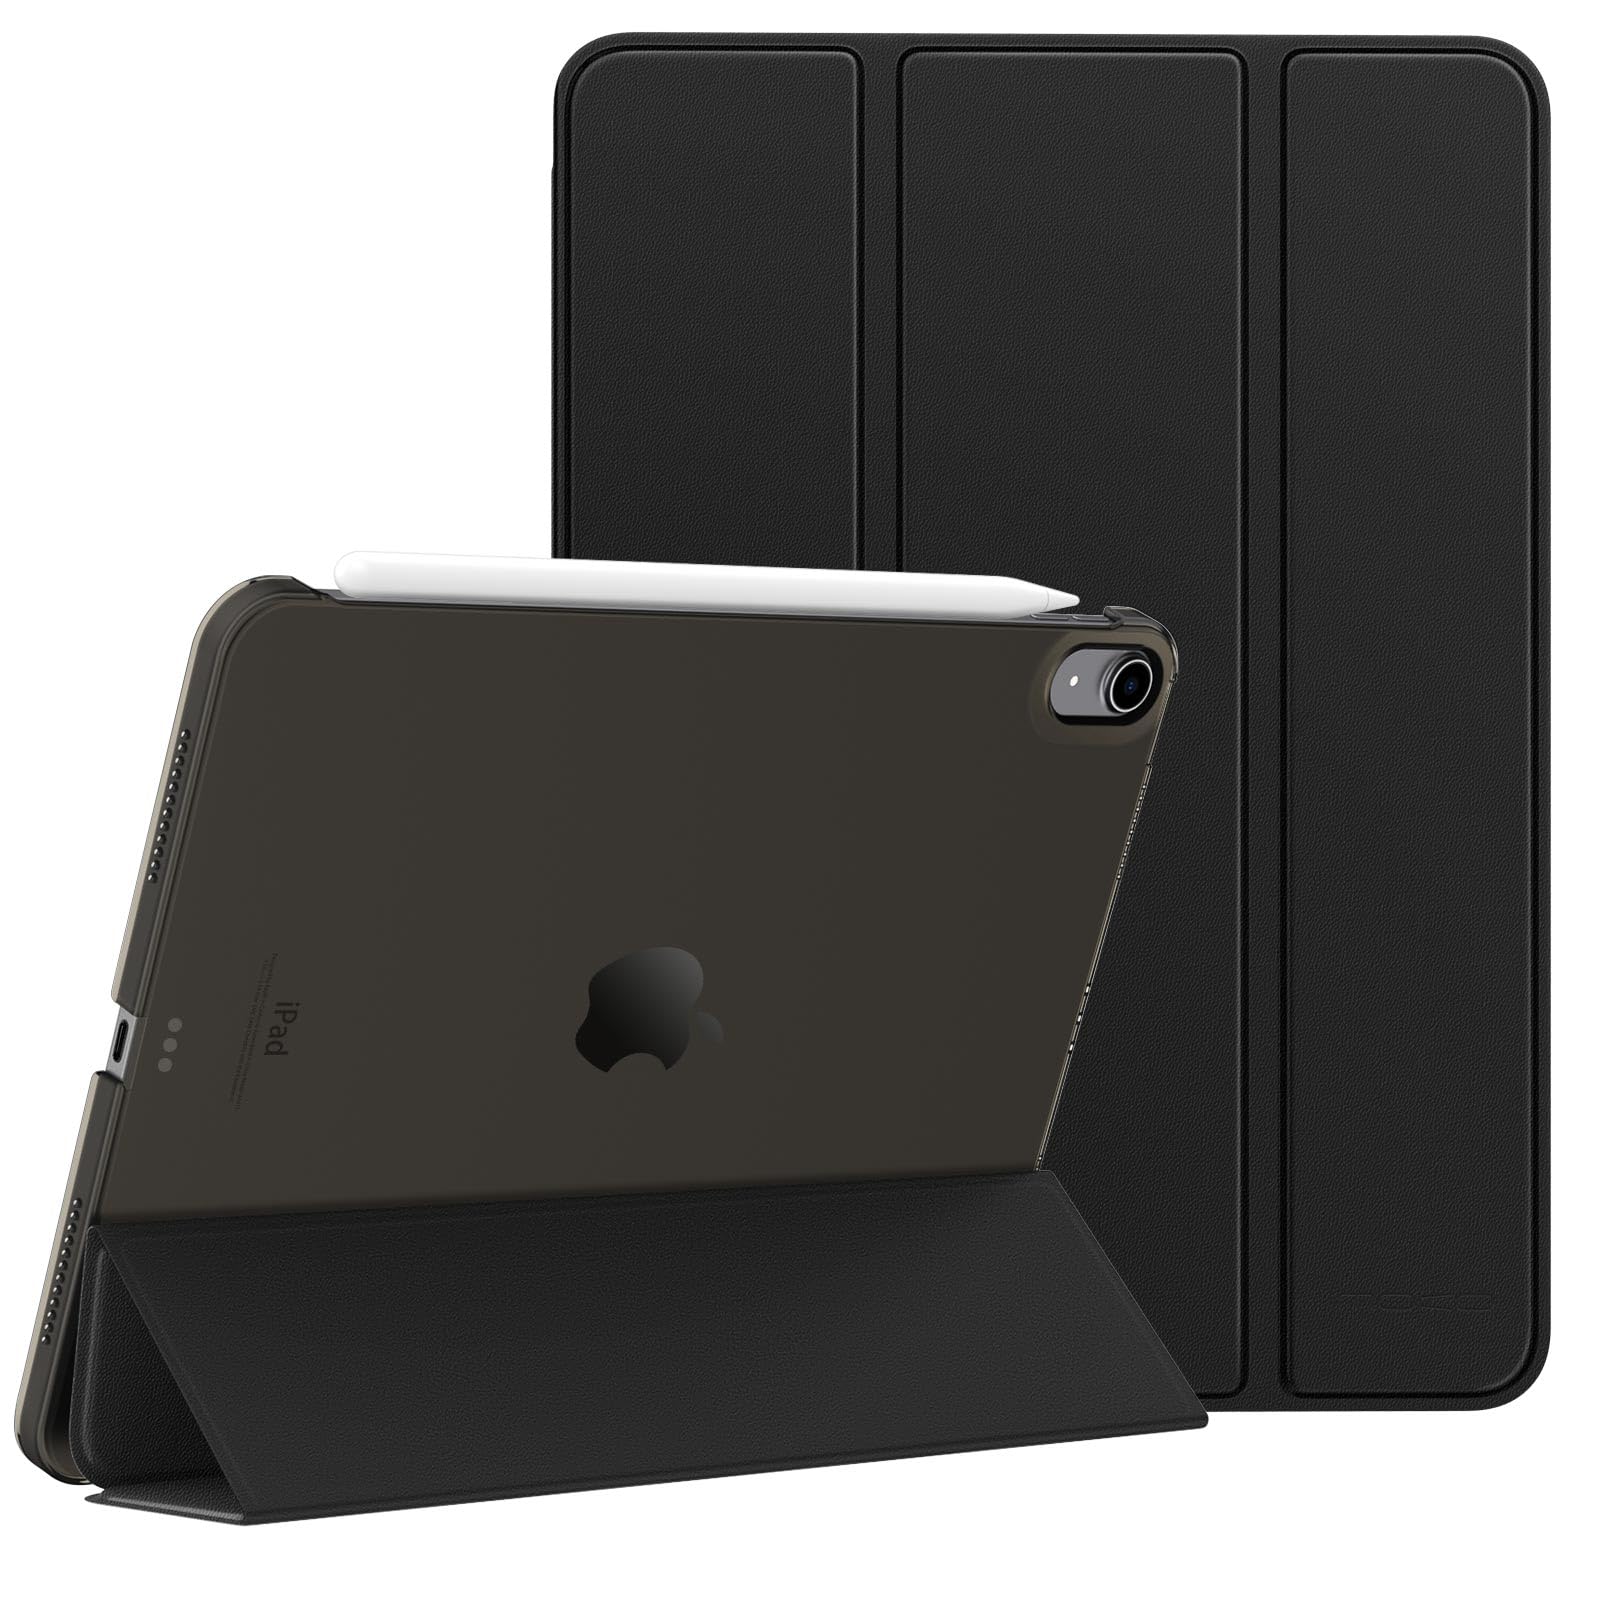 MoKo iPad Air 4th/5th Generation Case 2020/2022 10.9-inch Hard Back Case Cover for iPad Air 5,Support Touch ID Black $5.40 AC shipped Amazon Prime